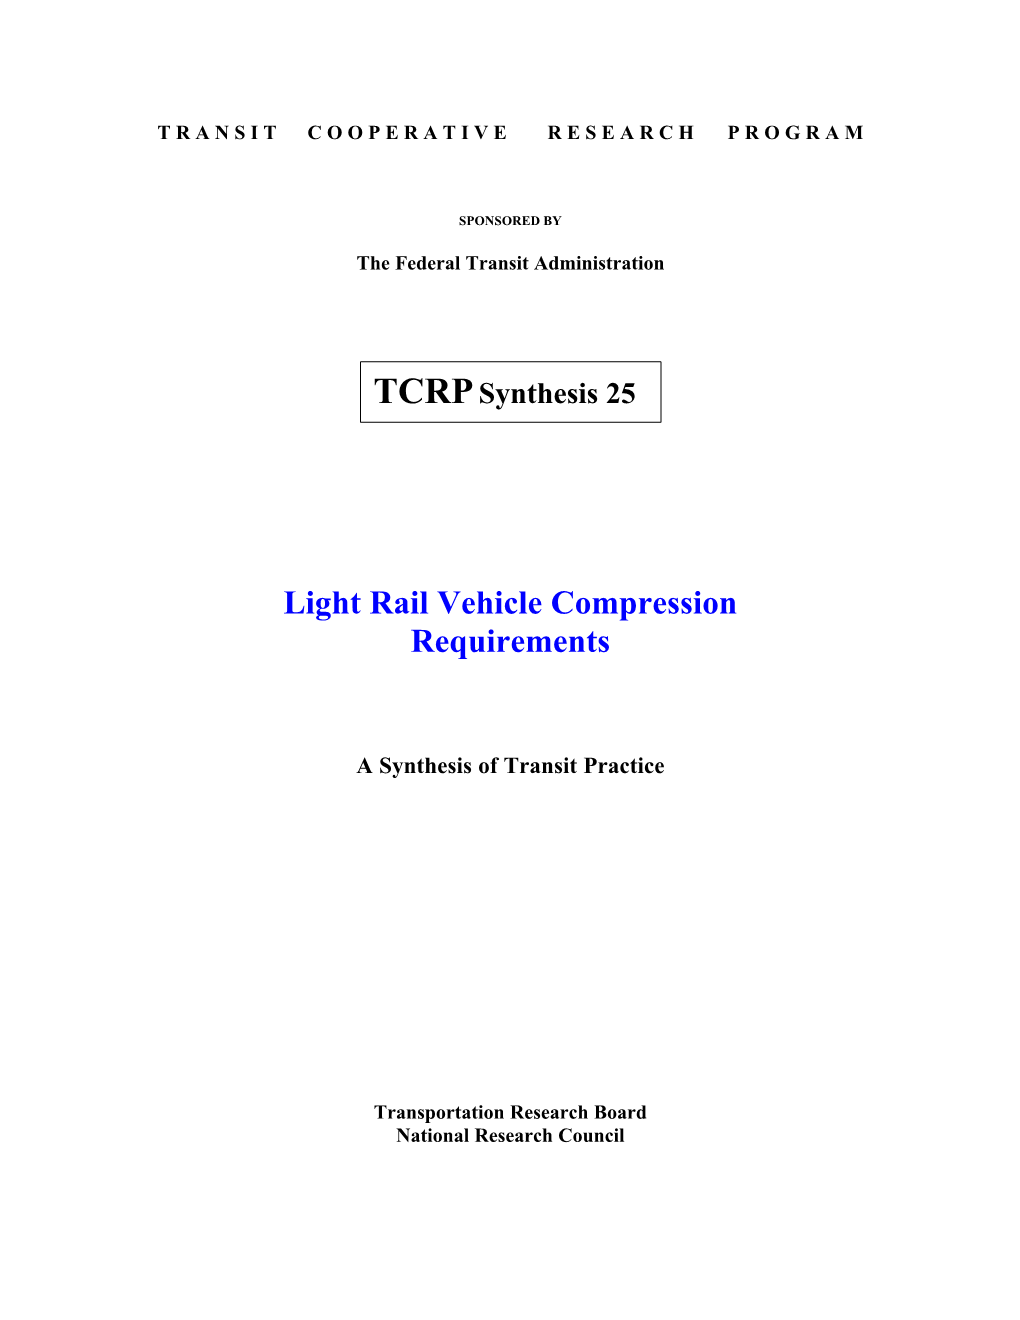 Light Rail Vehicle Compression Requirements